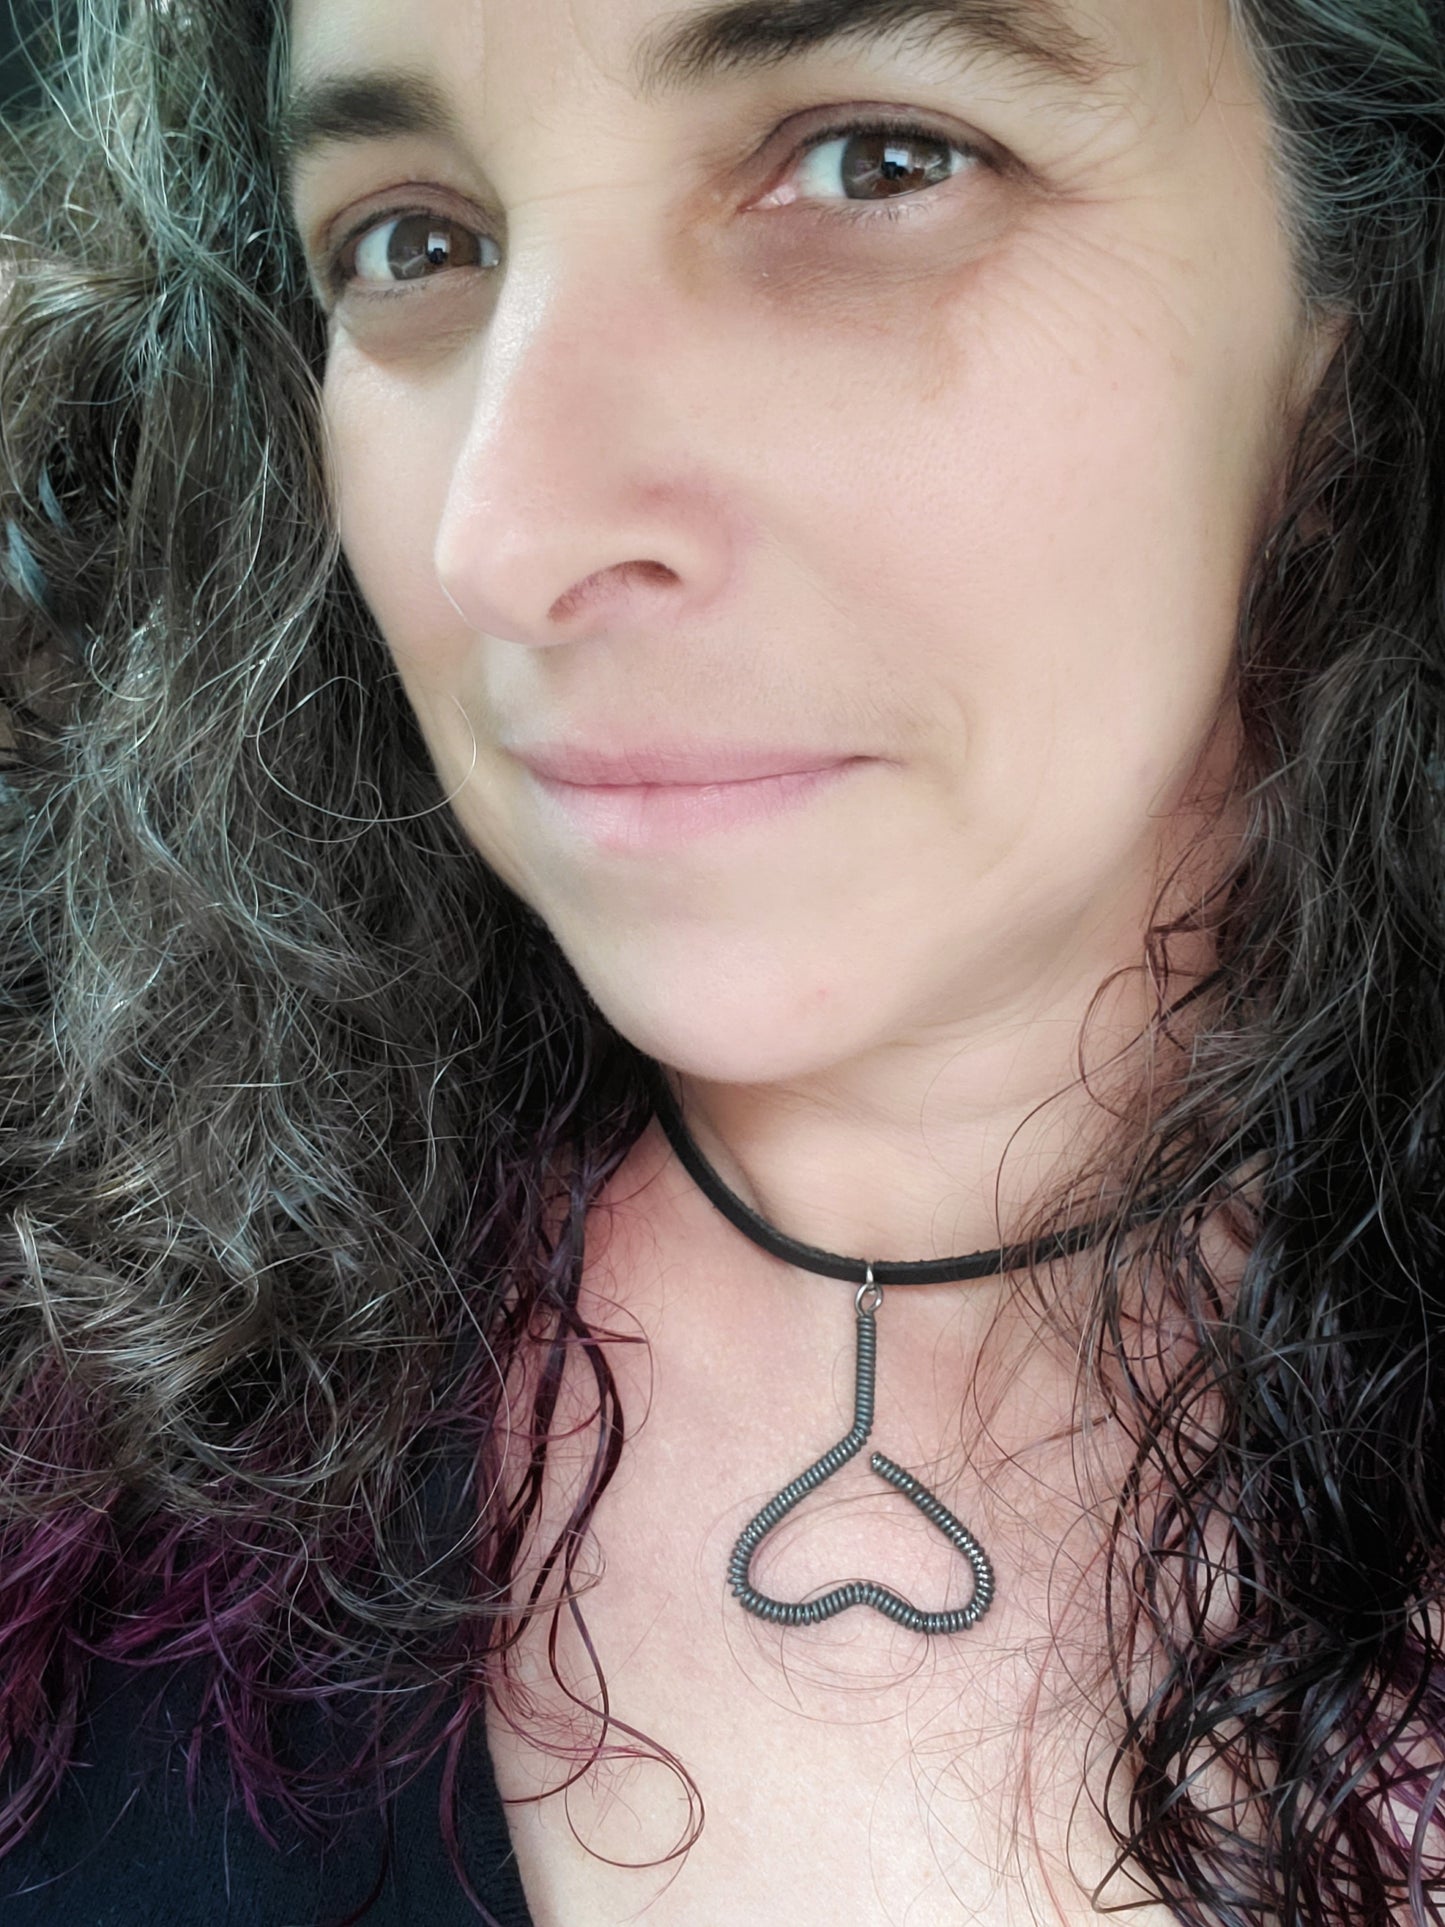 woman's head with black, grey and purple hair - she is wearing a necklace - pendant is in the shape of an upside down heart and is made from a black upcycled piano string - pendant hangs off a black leather cord